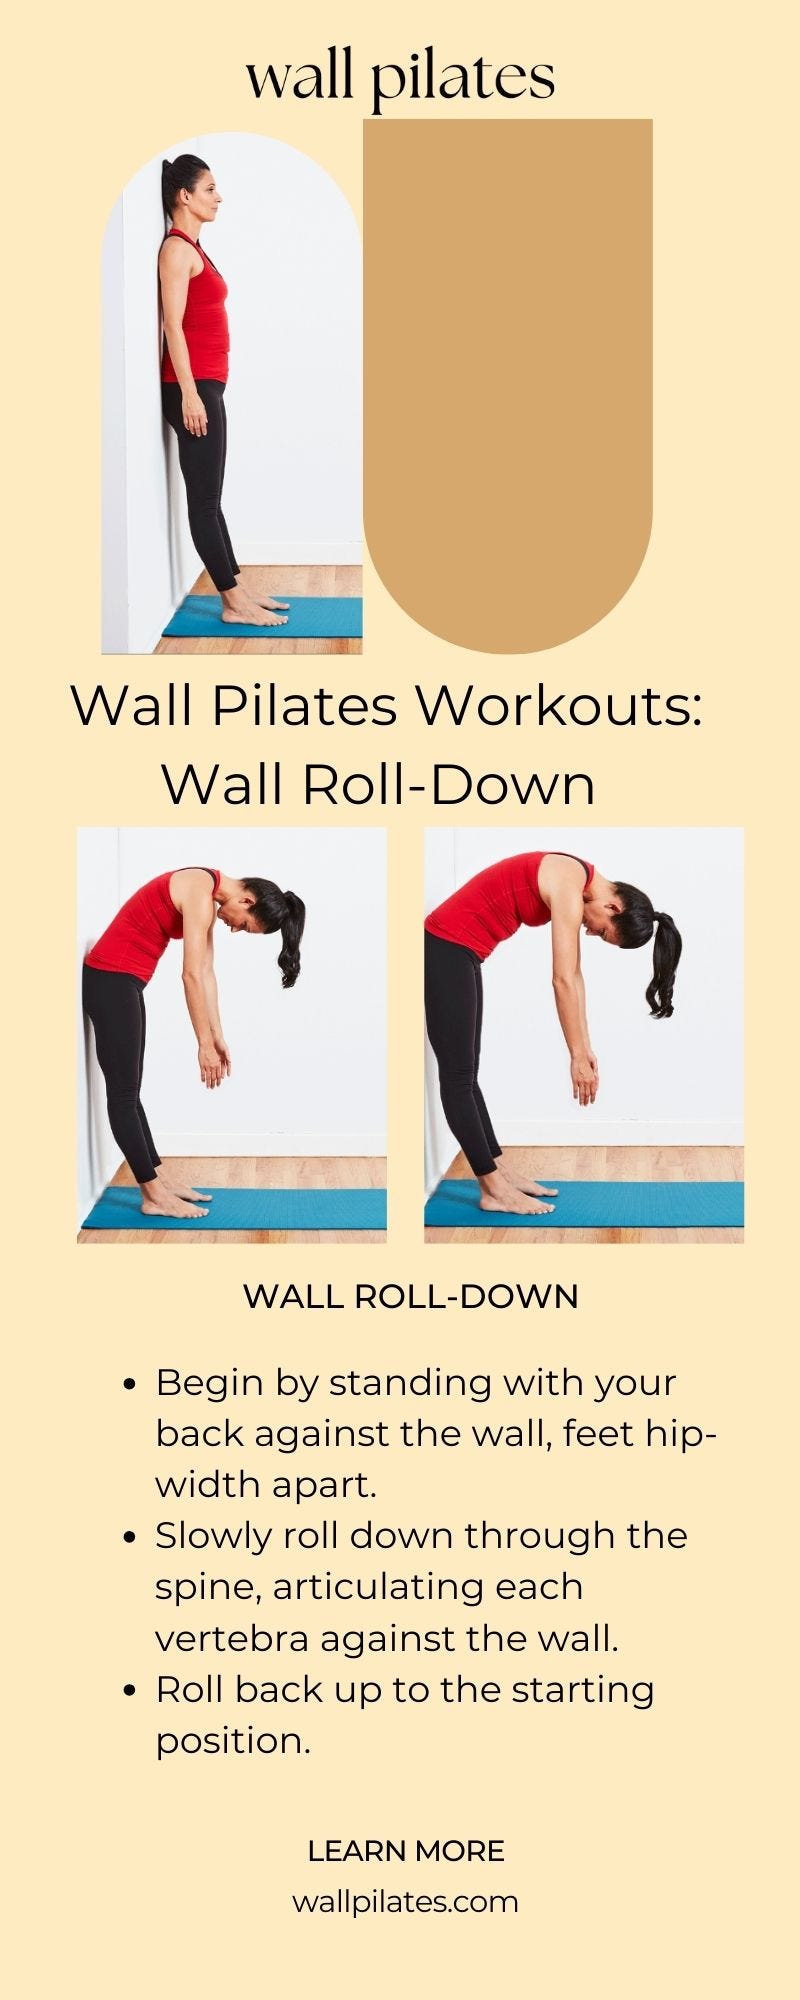 Wall Pilates Workout: Pilates Exercises for Better Stability